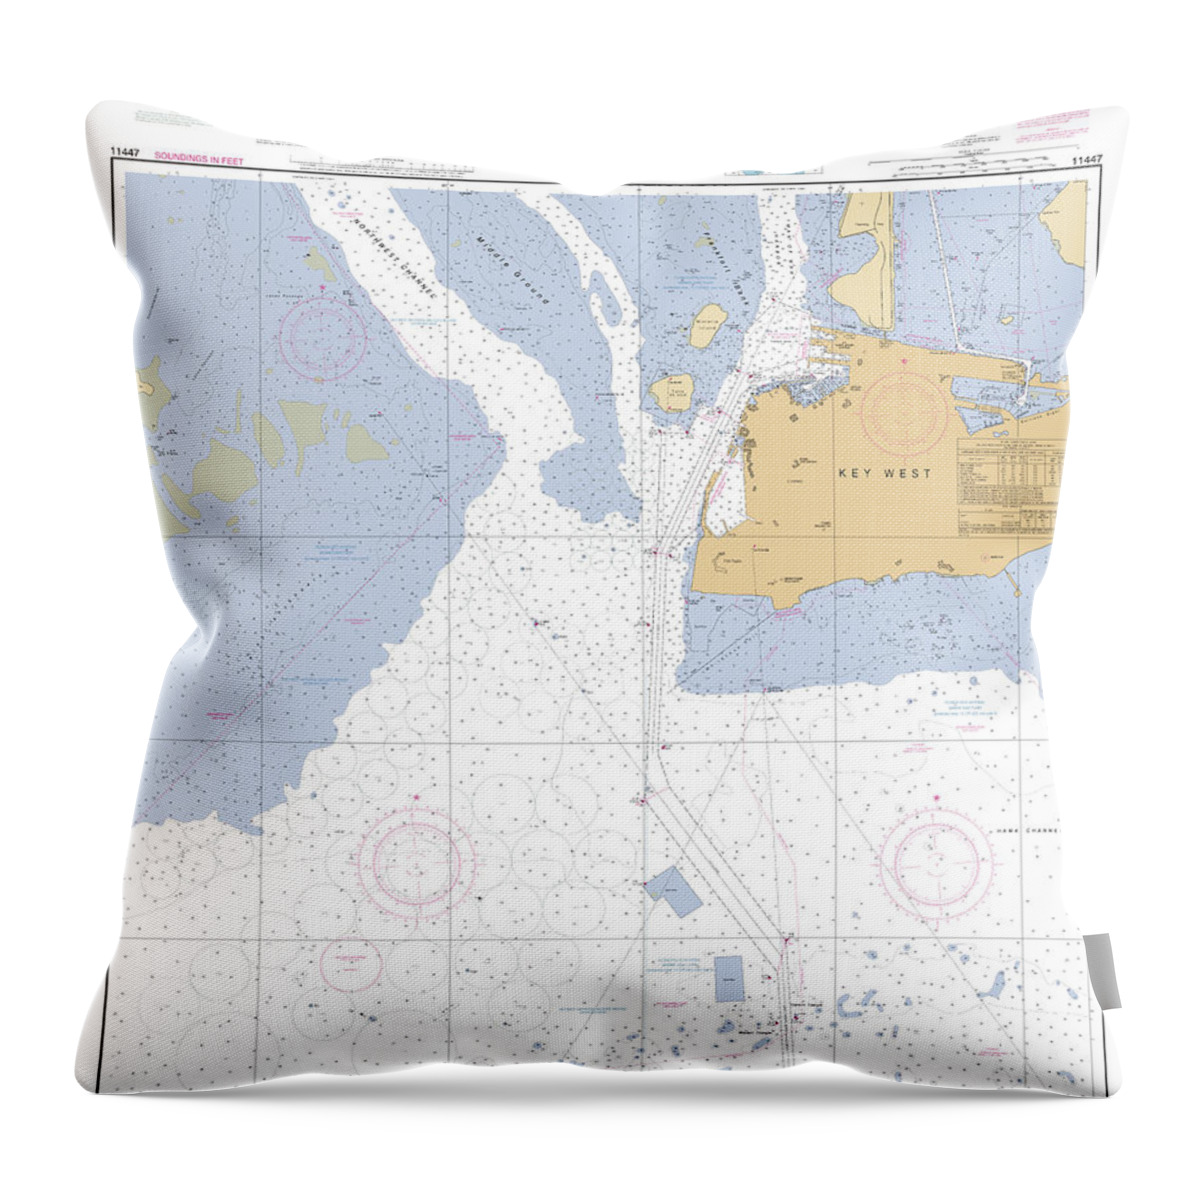 Key West Harbor Throw Pillow featuring the digital art Key West Harbor, NOAA Chart 11447 by Nautical Chartworks